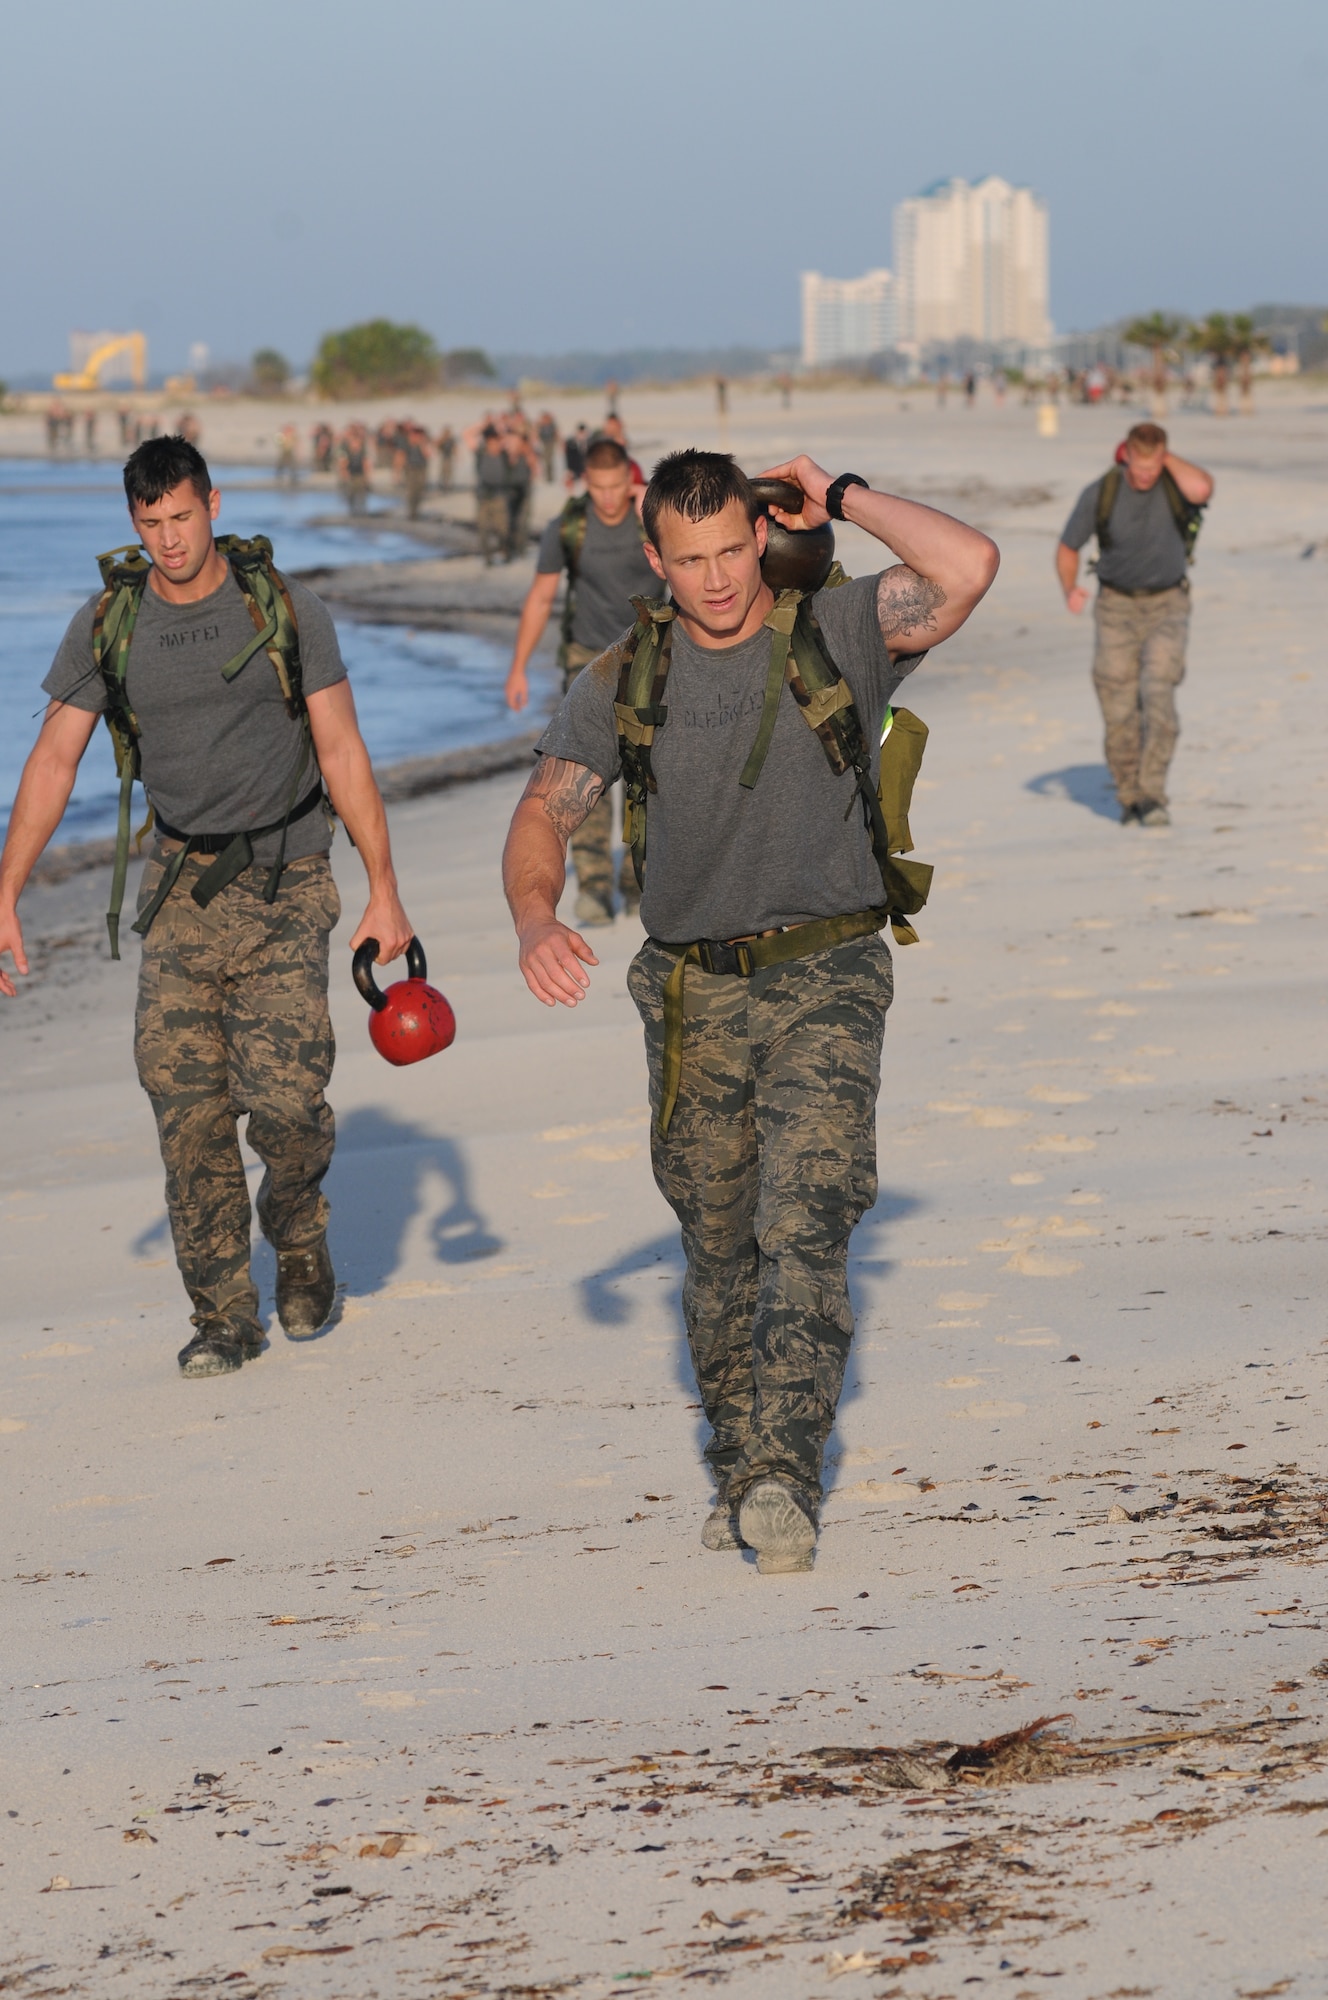 Airman 1st Class Craig Maffei and Second Lt. James Cleckler, 334th Training Squadron, carry kettle bells to their next workout stations during the combat controllers’ physical training session April 12, 2013, on Biloxi beach.  Combat controllers are ground troops who are embedded with special forces teams and provide close-air support for special forces units. While at Keesler, trainees learn how to run, swim, carry a rucksack and conduct air traffic control. These Airmen are prepared physically and mentally for the demands of the combat controller pipeline while earning air traffic control certification in just 15 weeks.  (U.S. Air Force photo by Kemberly Groue)